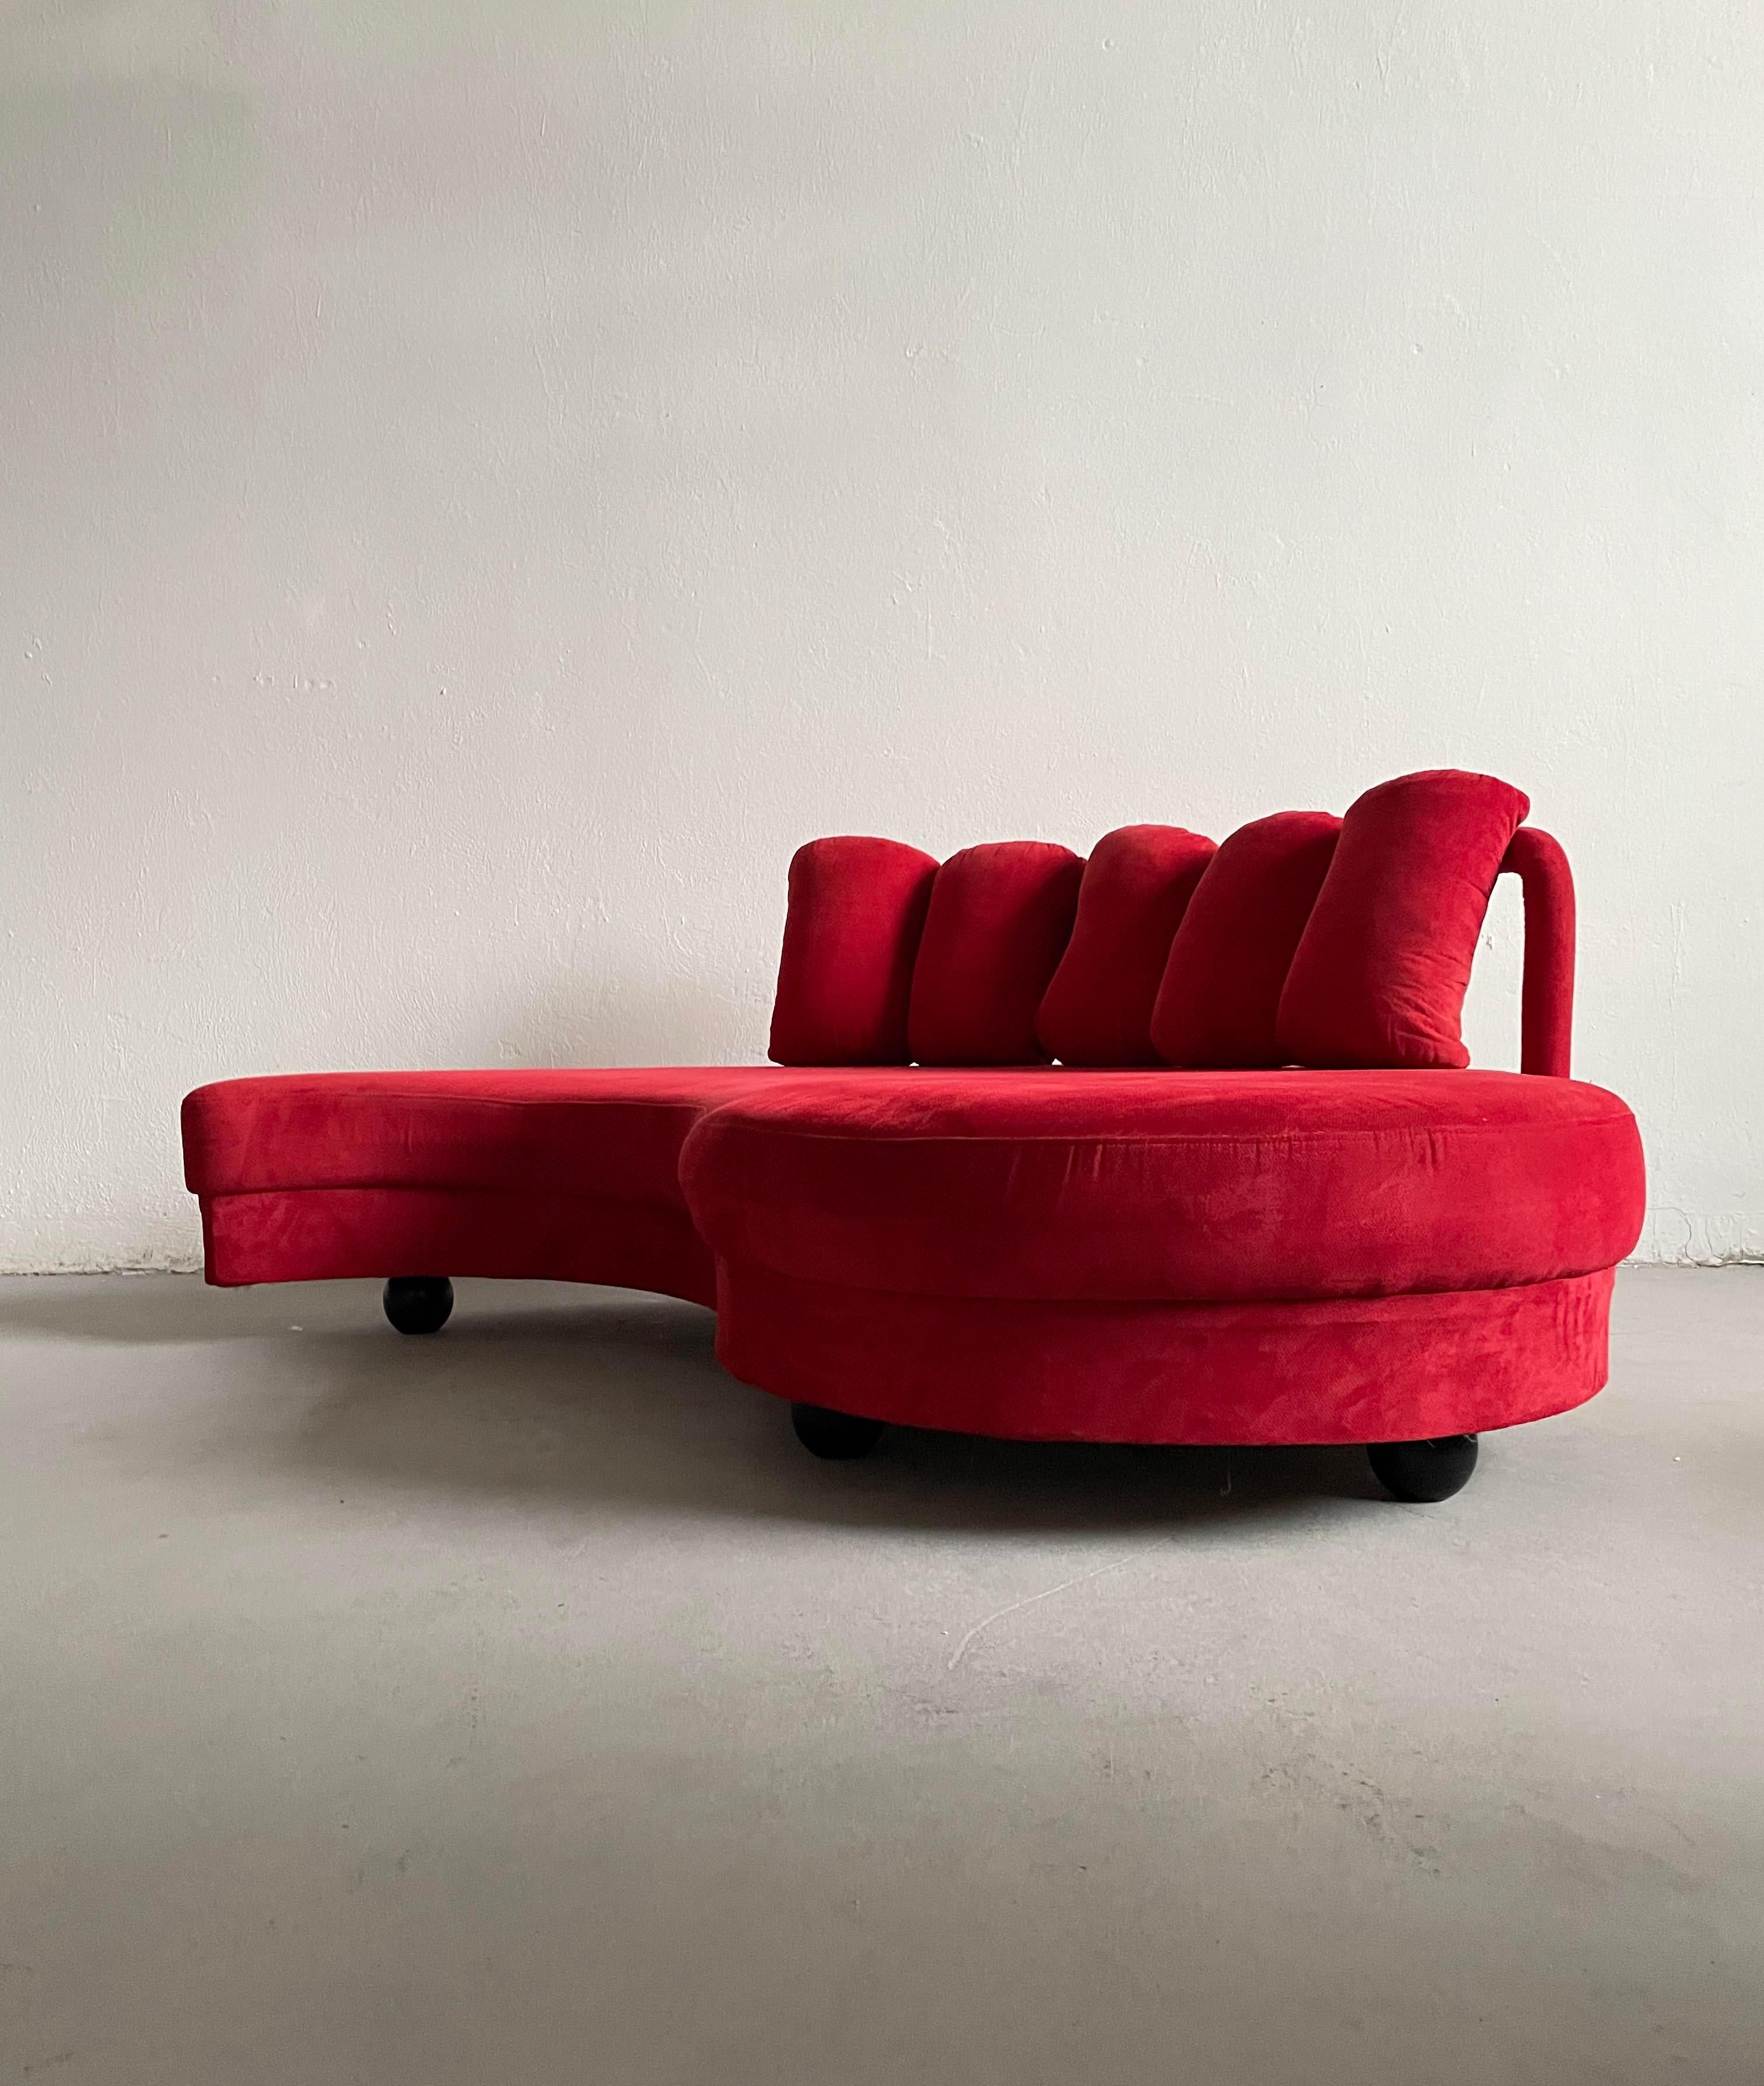 Set of 2 Postmodern Curved Yin-Yang Shaped Sofa Daybeds in Red Fabric, c 1980s For Sale 5